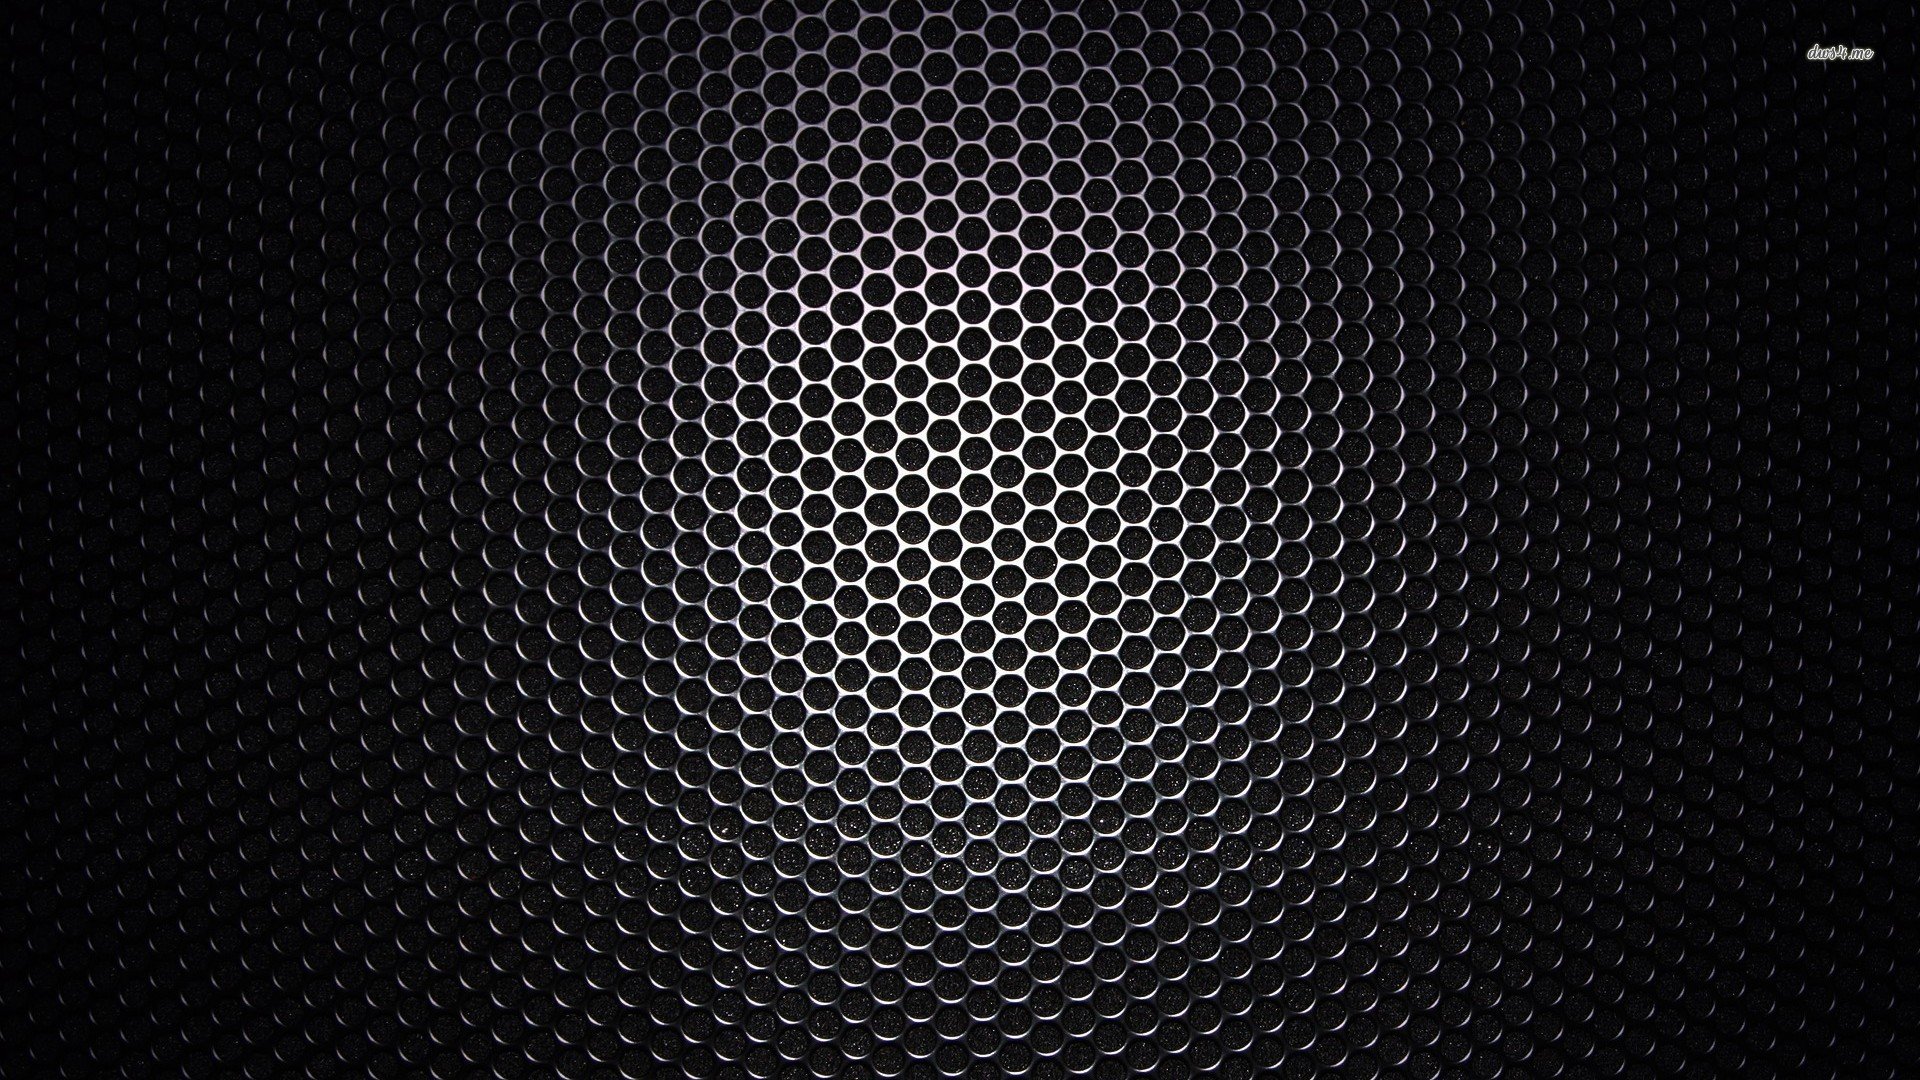 Perforated metal pattern wallpaper   Abstract wallpapers   20656 1920x1080